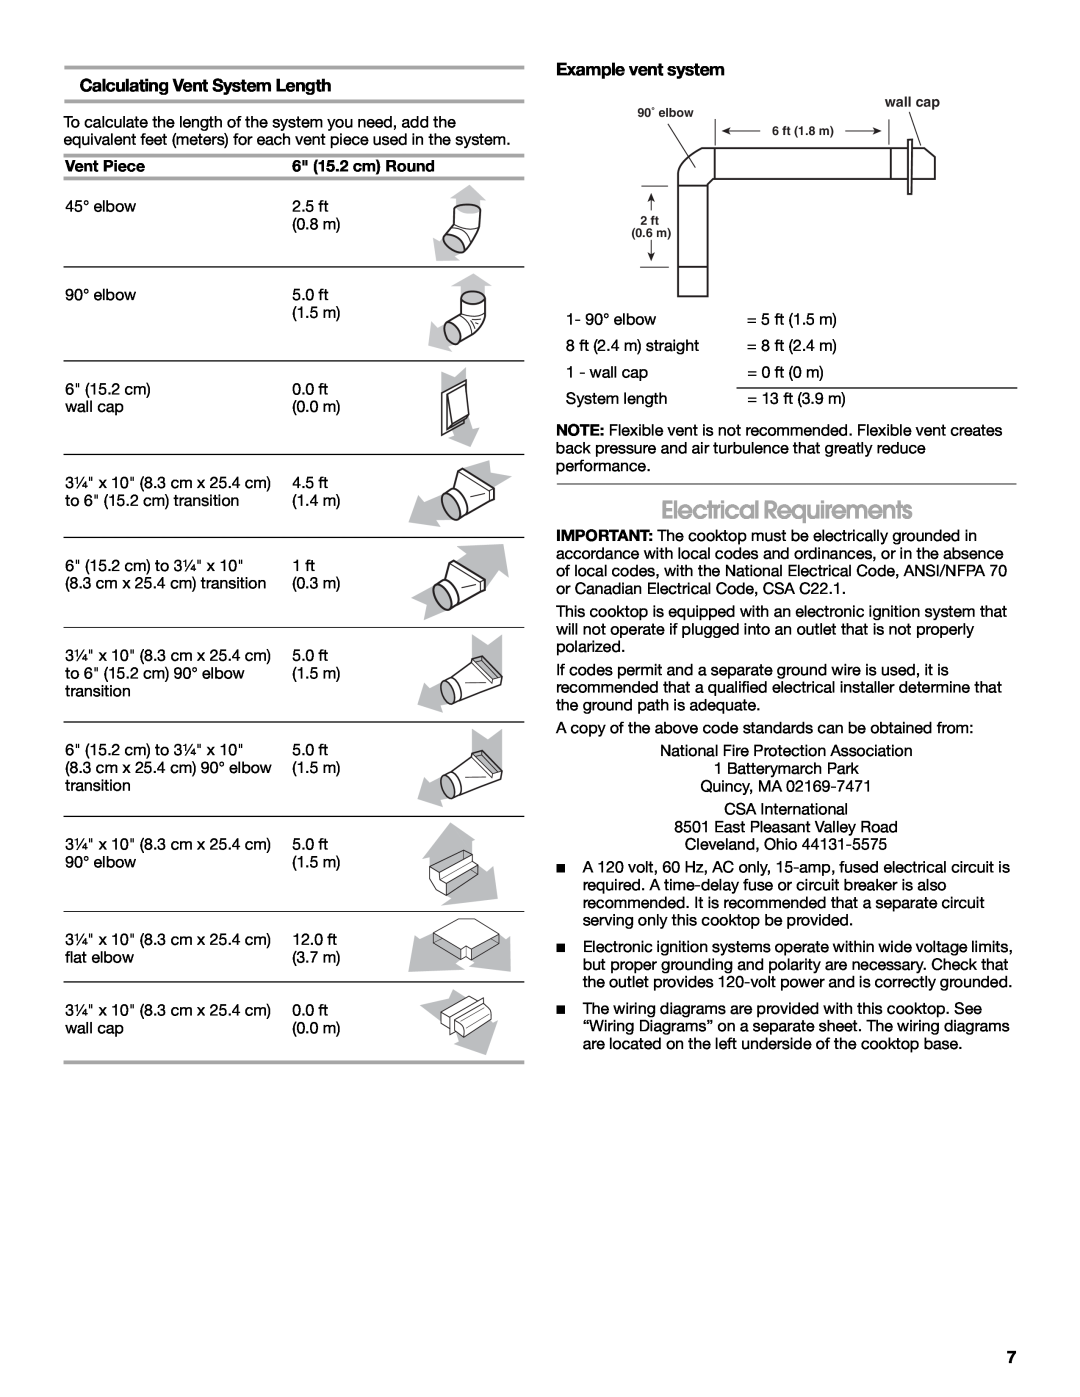 Jenn-Air W10574732A Electrical Requirements, Calculating Vent System Length, Example vent system, Vent Piece 